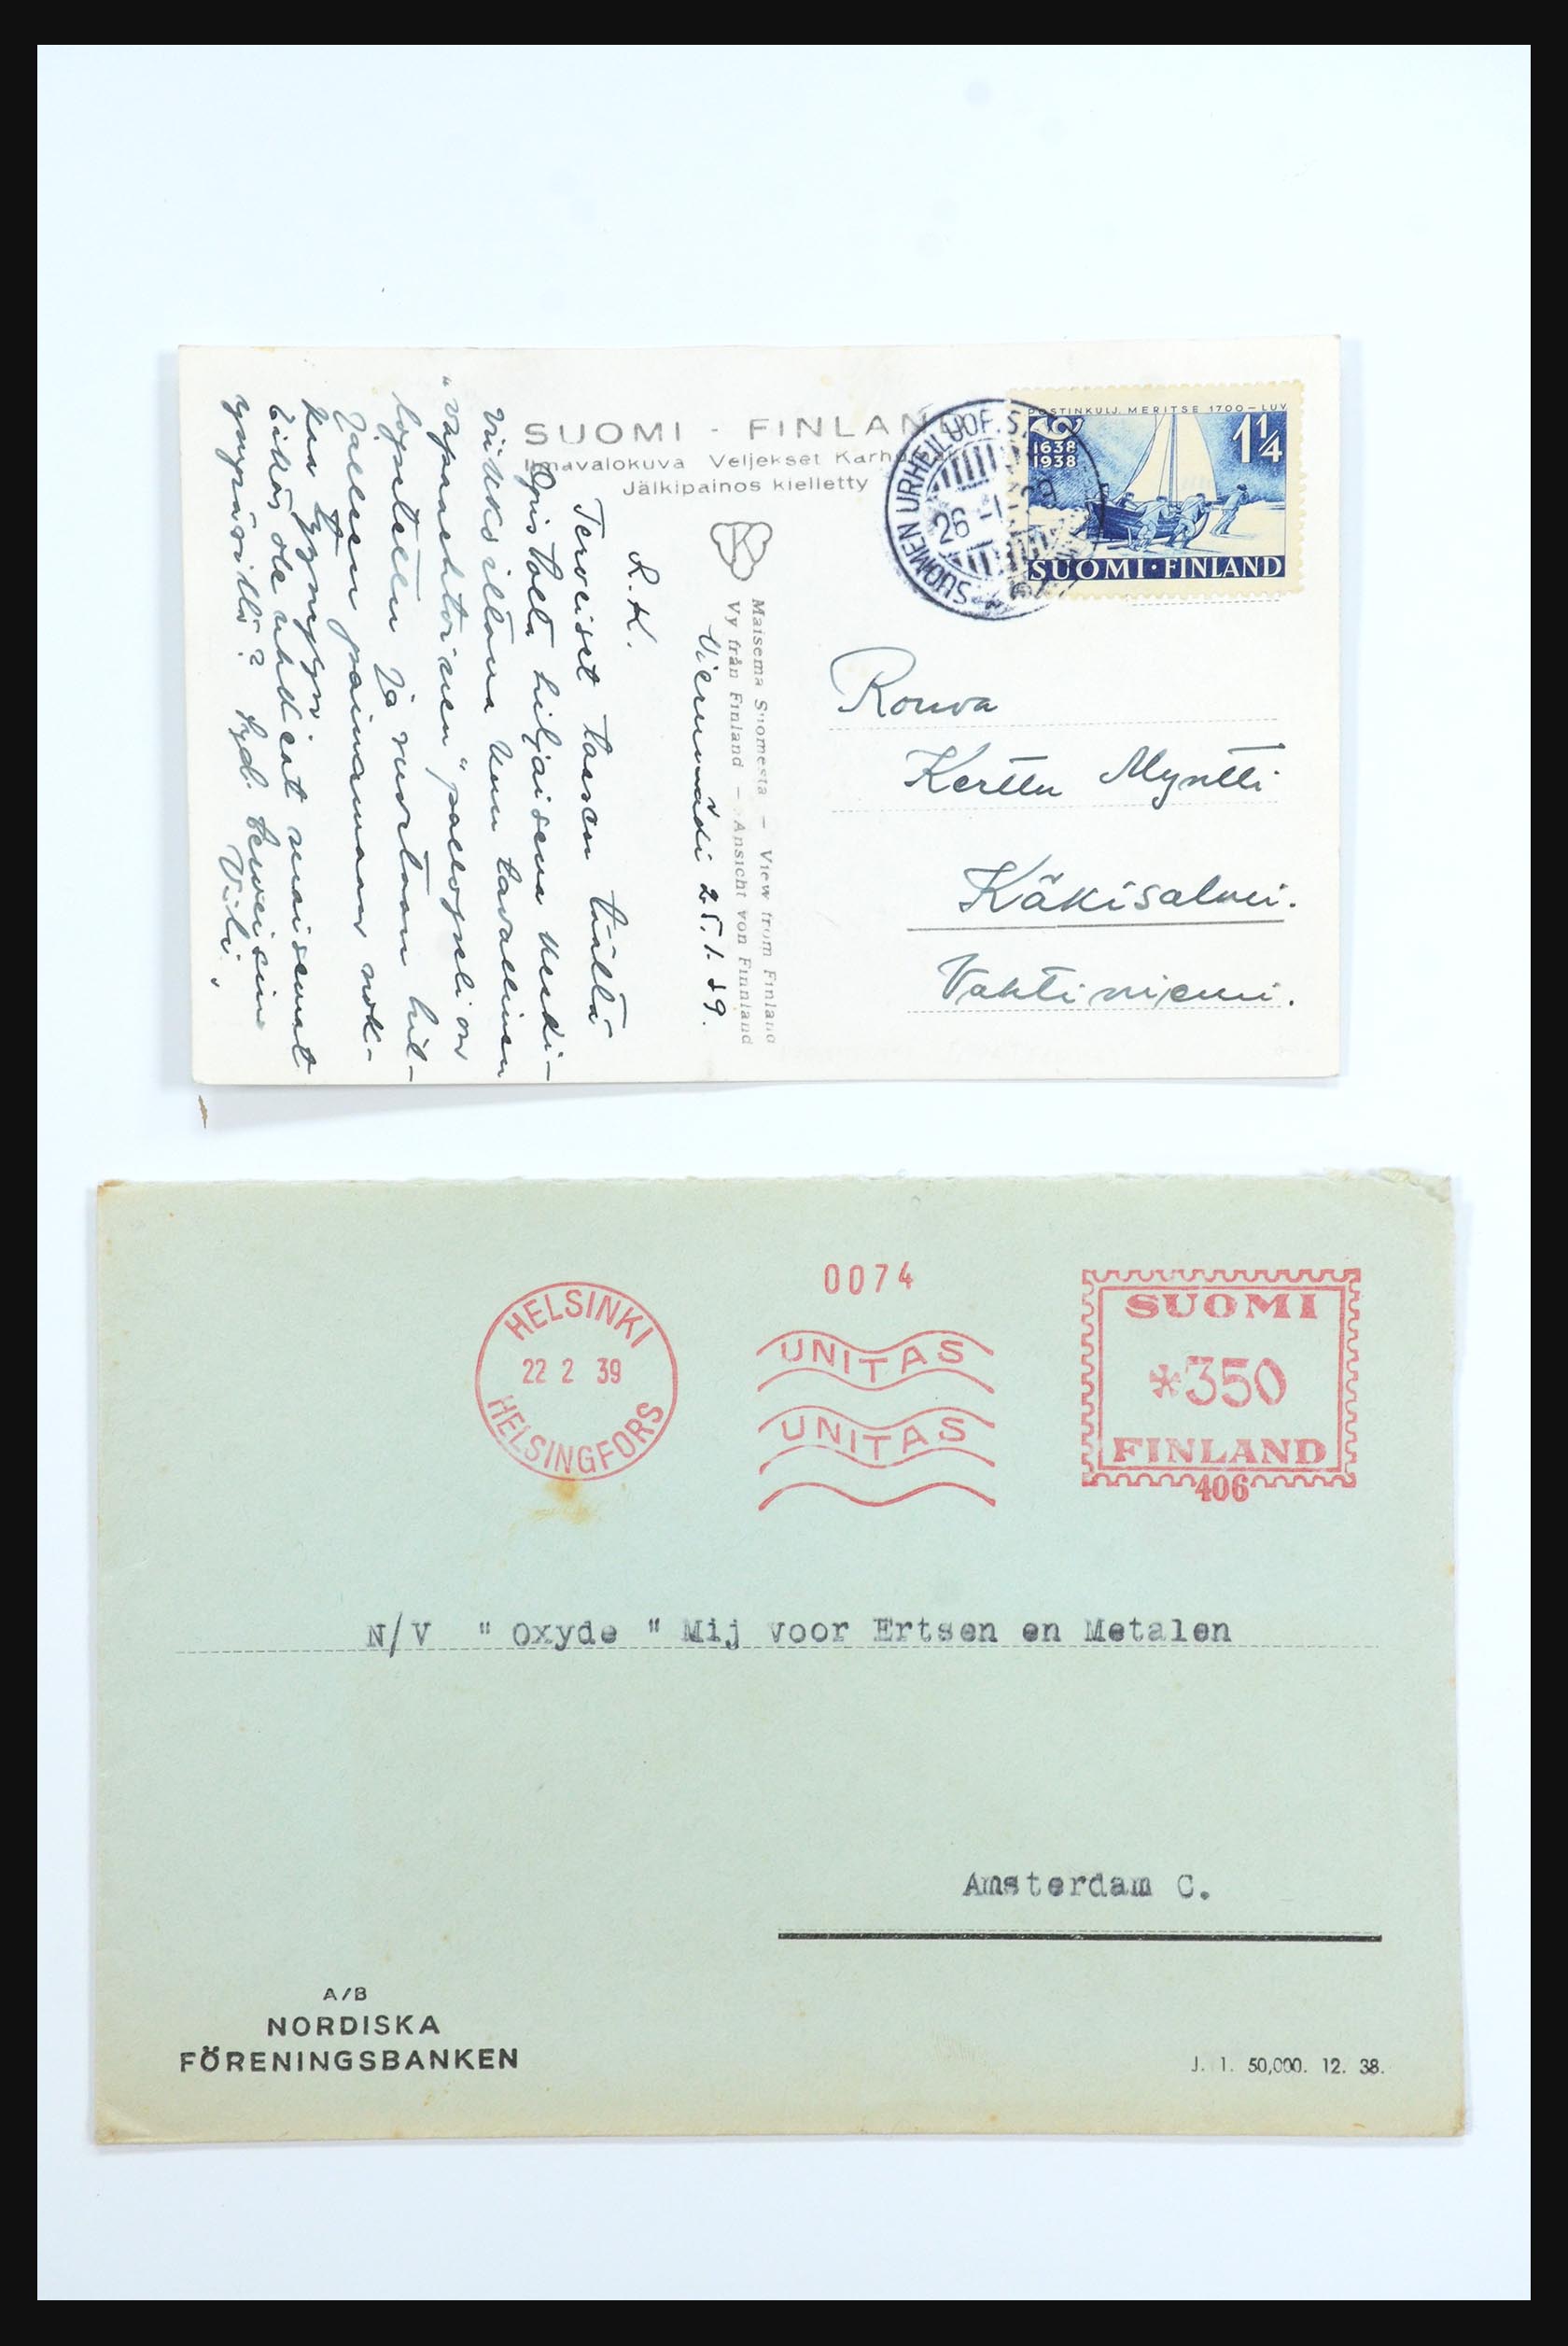 31658 072 - 31658 Finland covers 1833-1960.